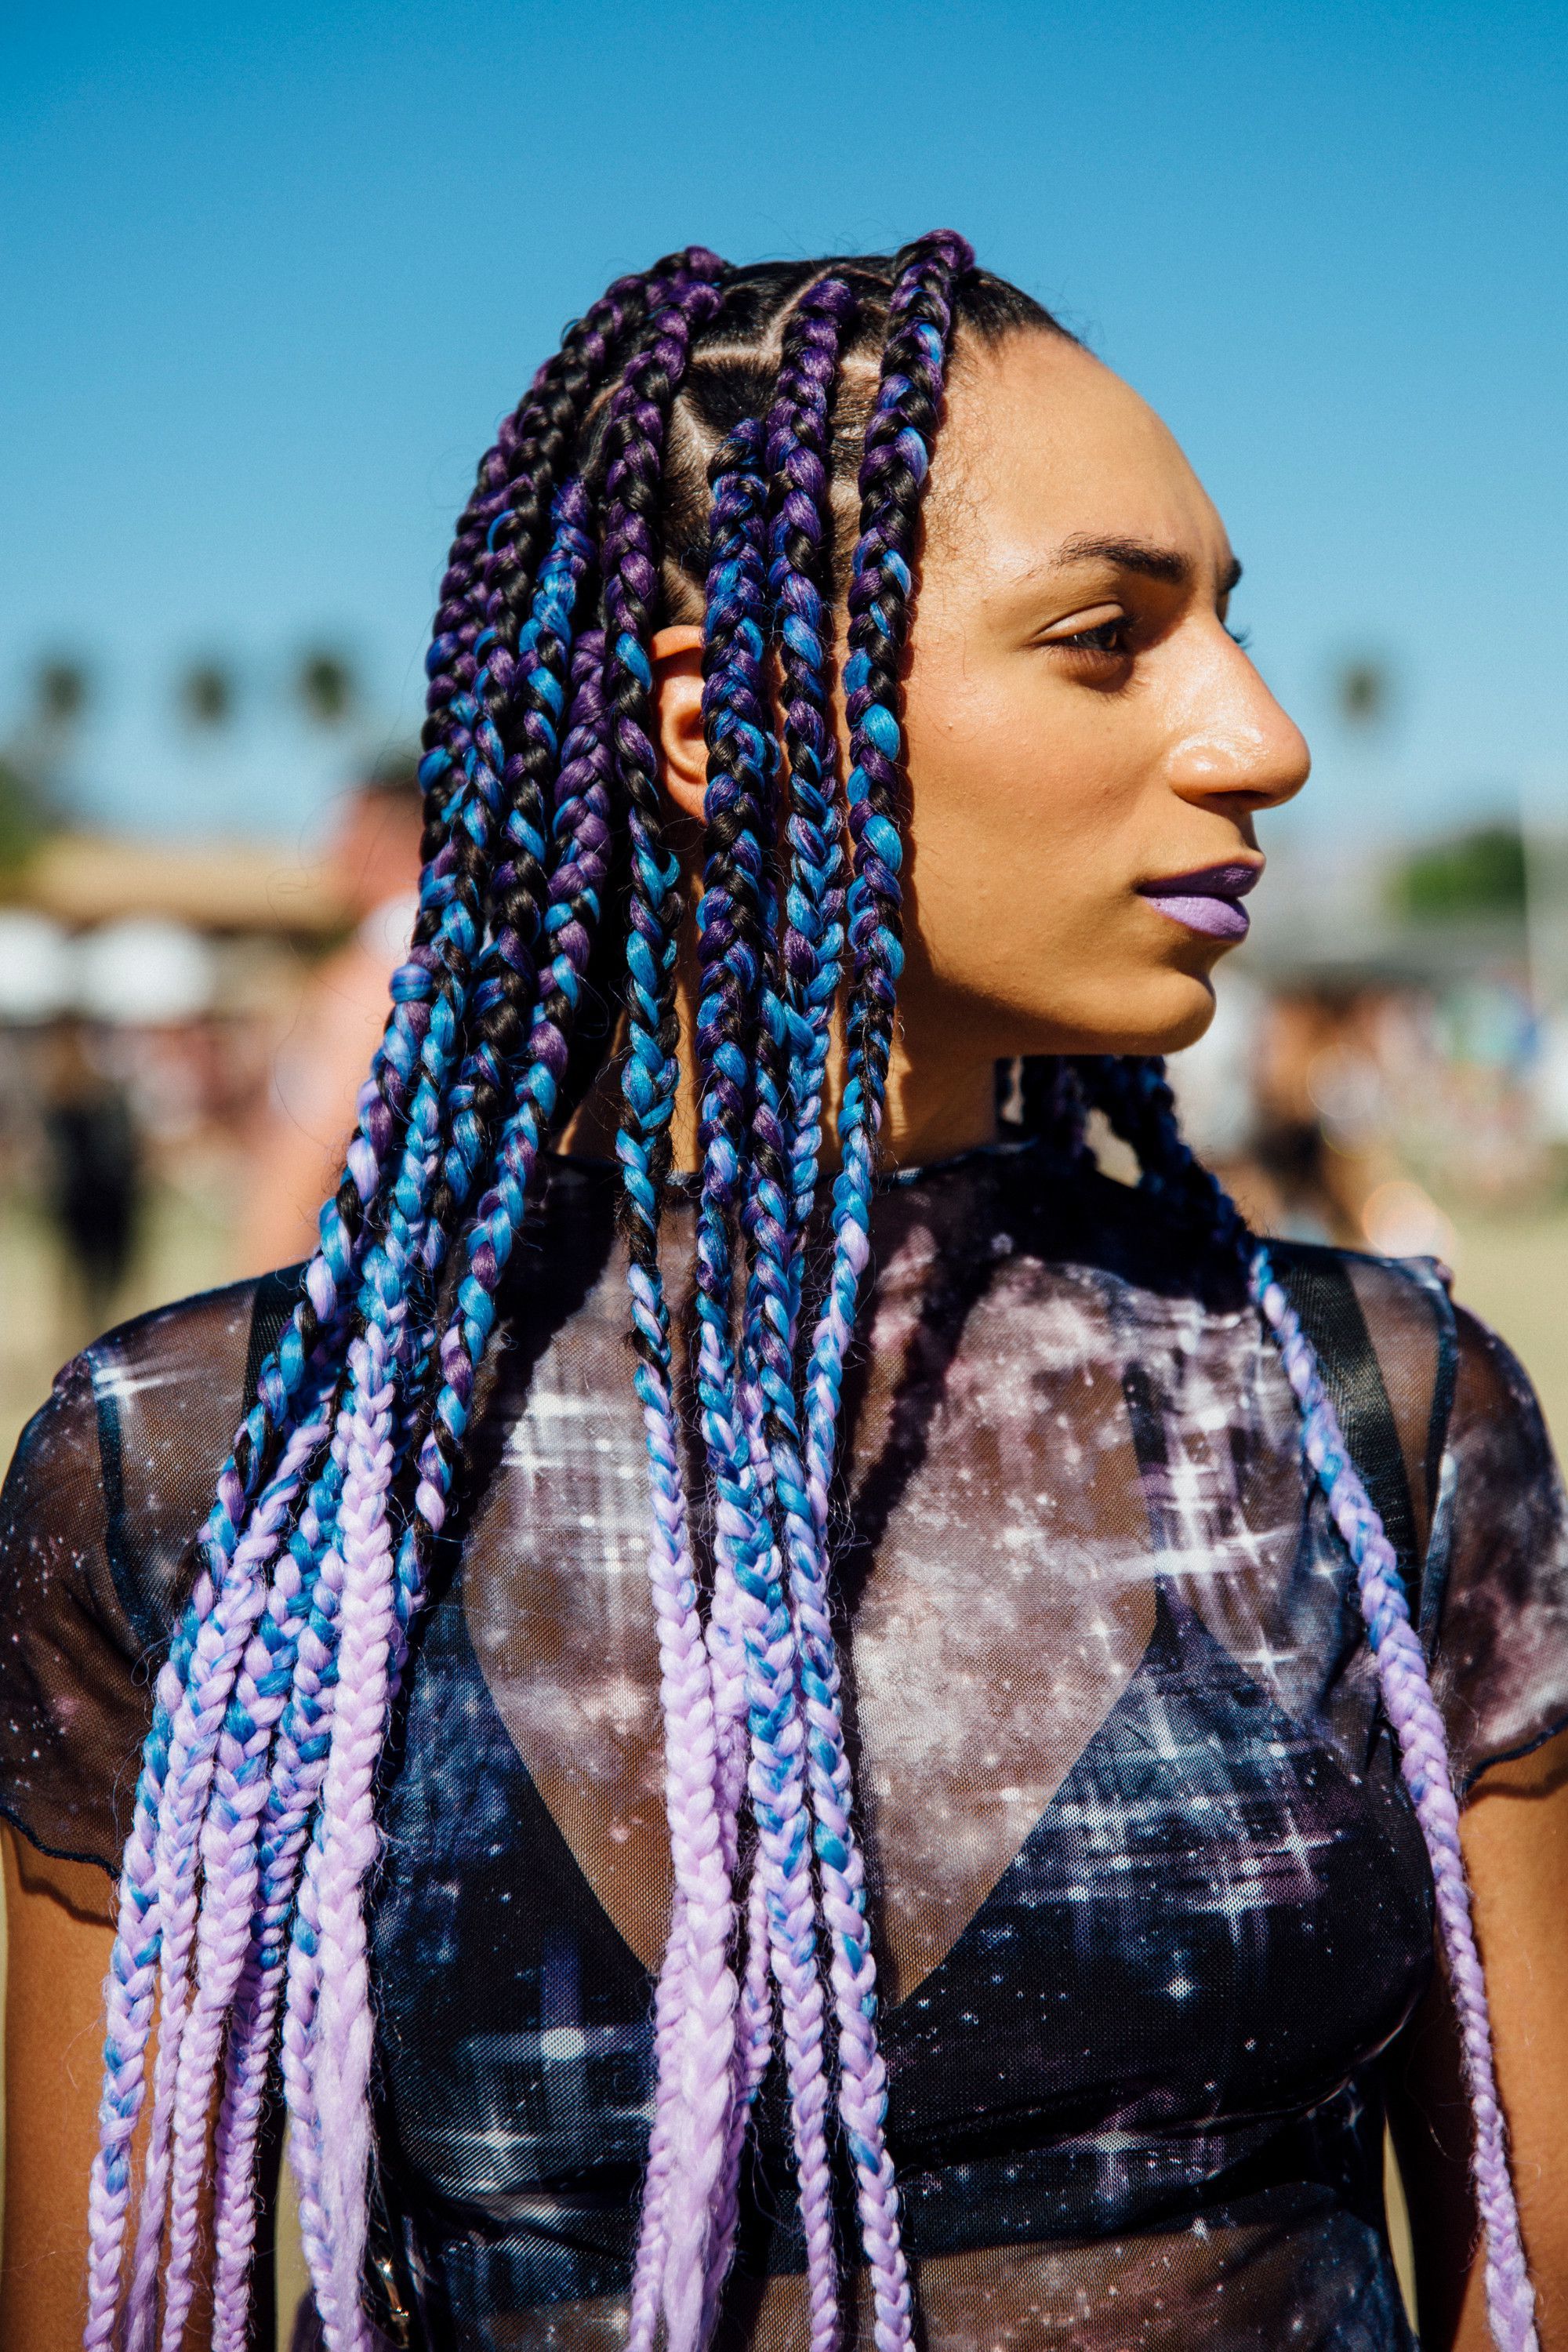 Pastel Hair Color Style Trend At Coachella Festival With Regard To 2020 Cotton Candy Colors Blend Mermaid Braid Hairstyles (Gallery 19 of 20)